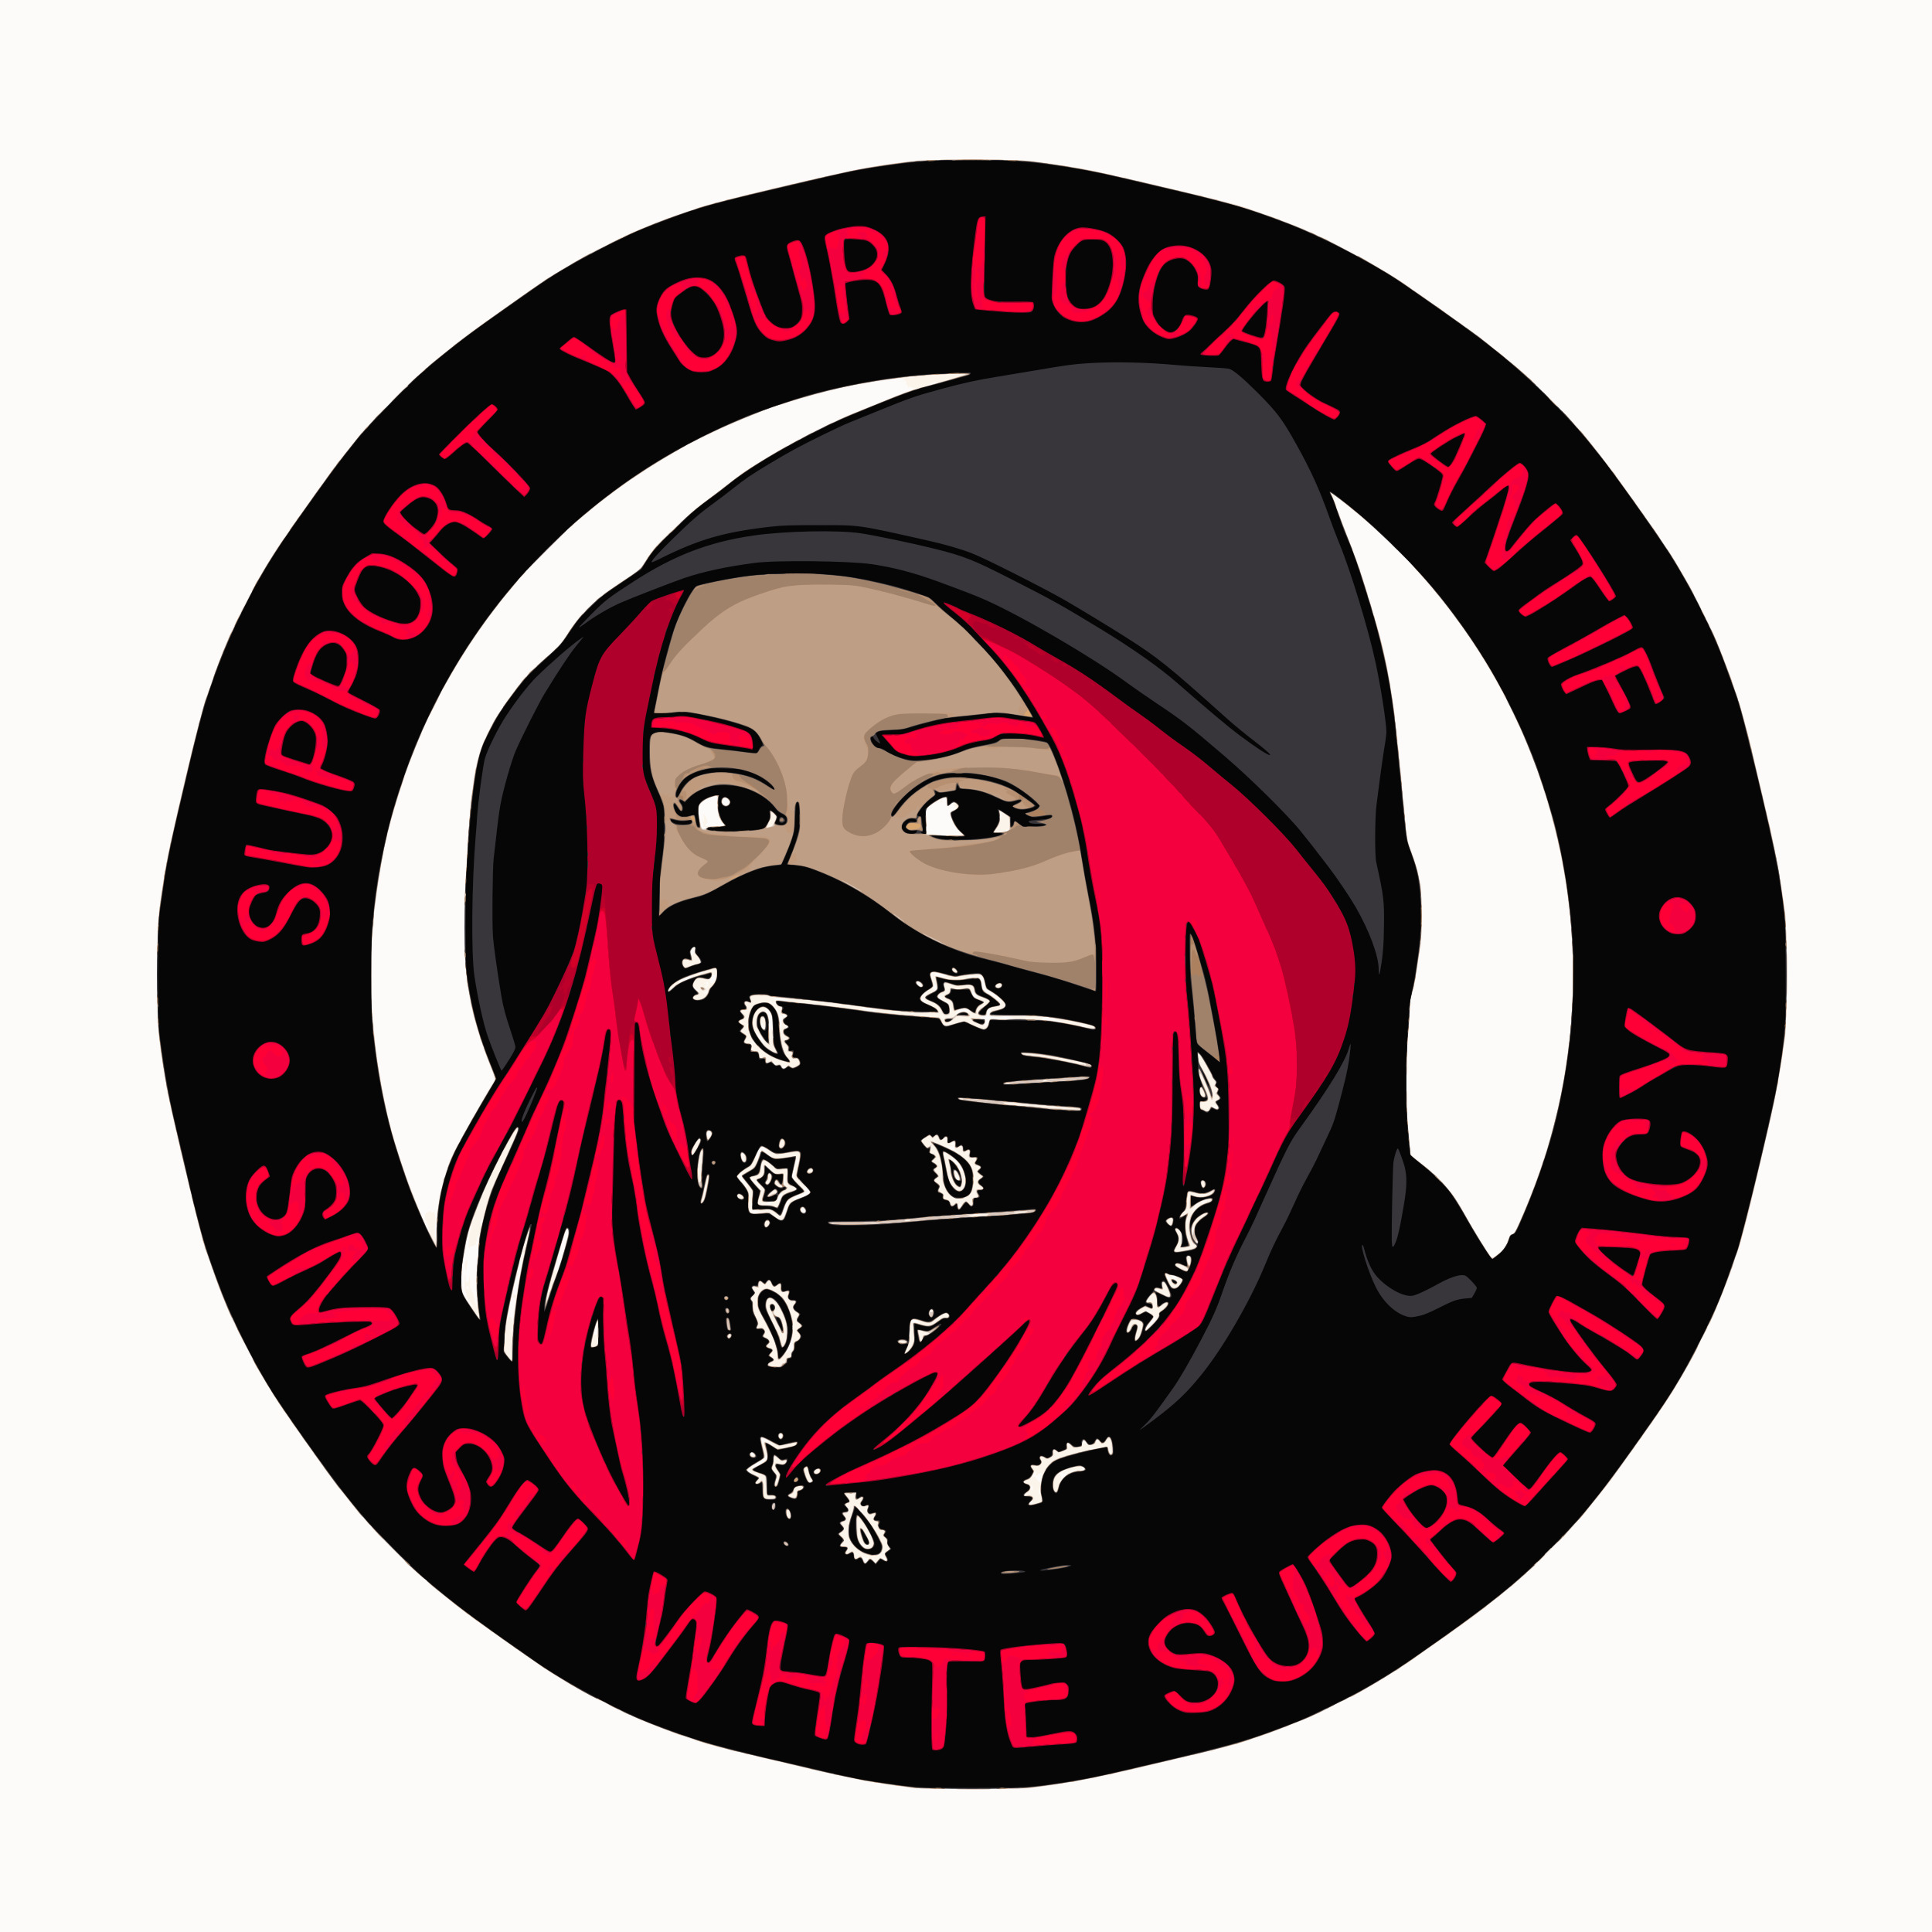 Support your local antifa